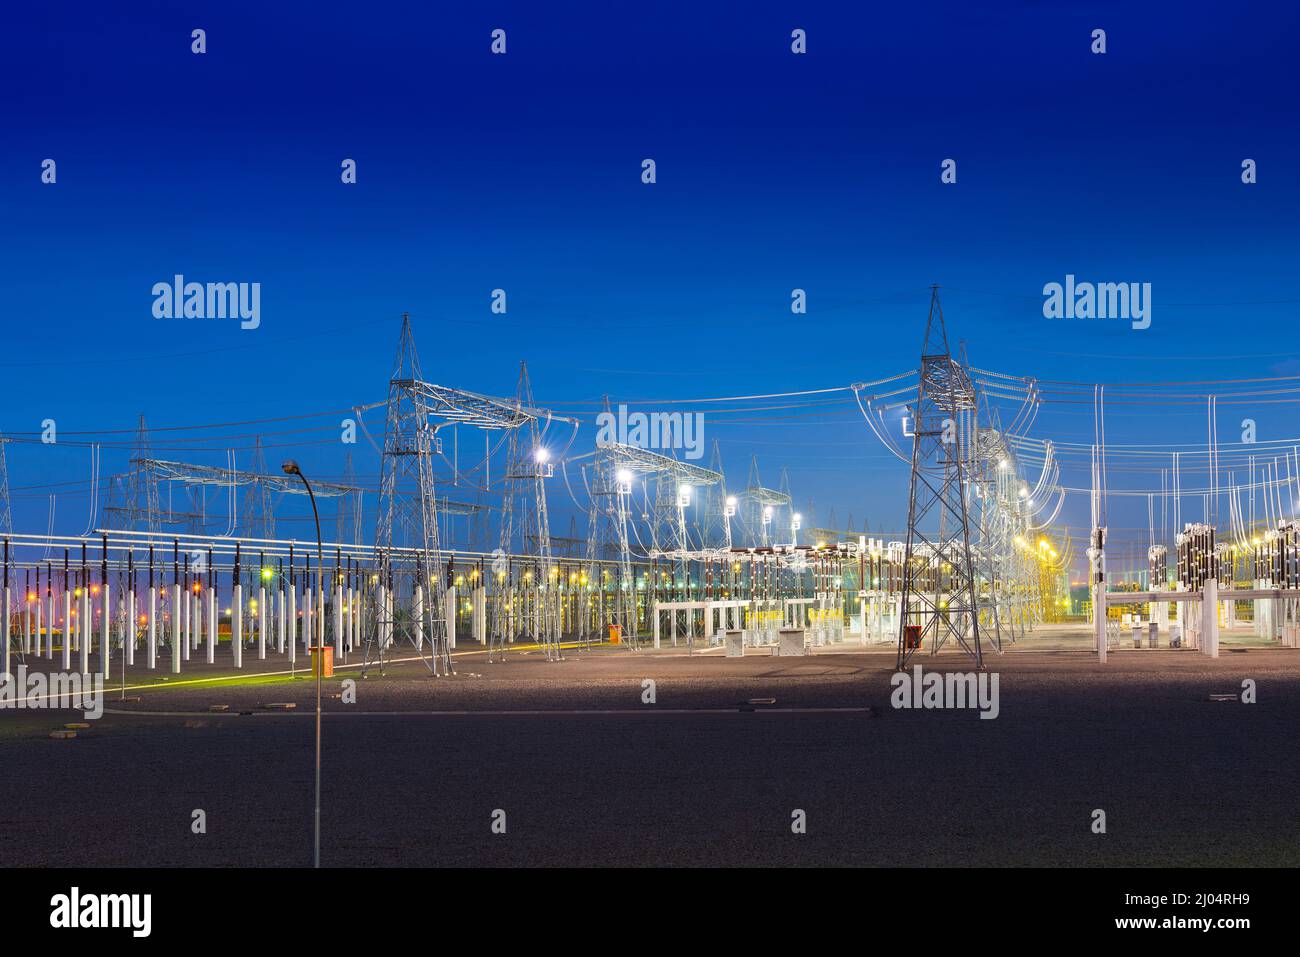 View of an electric substation at night Stock Photo